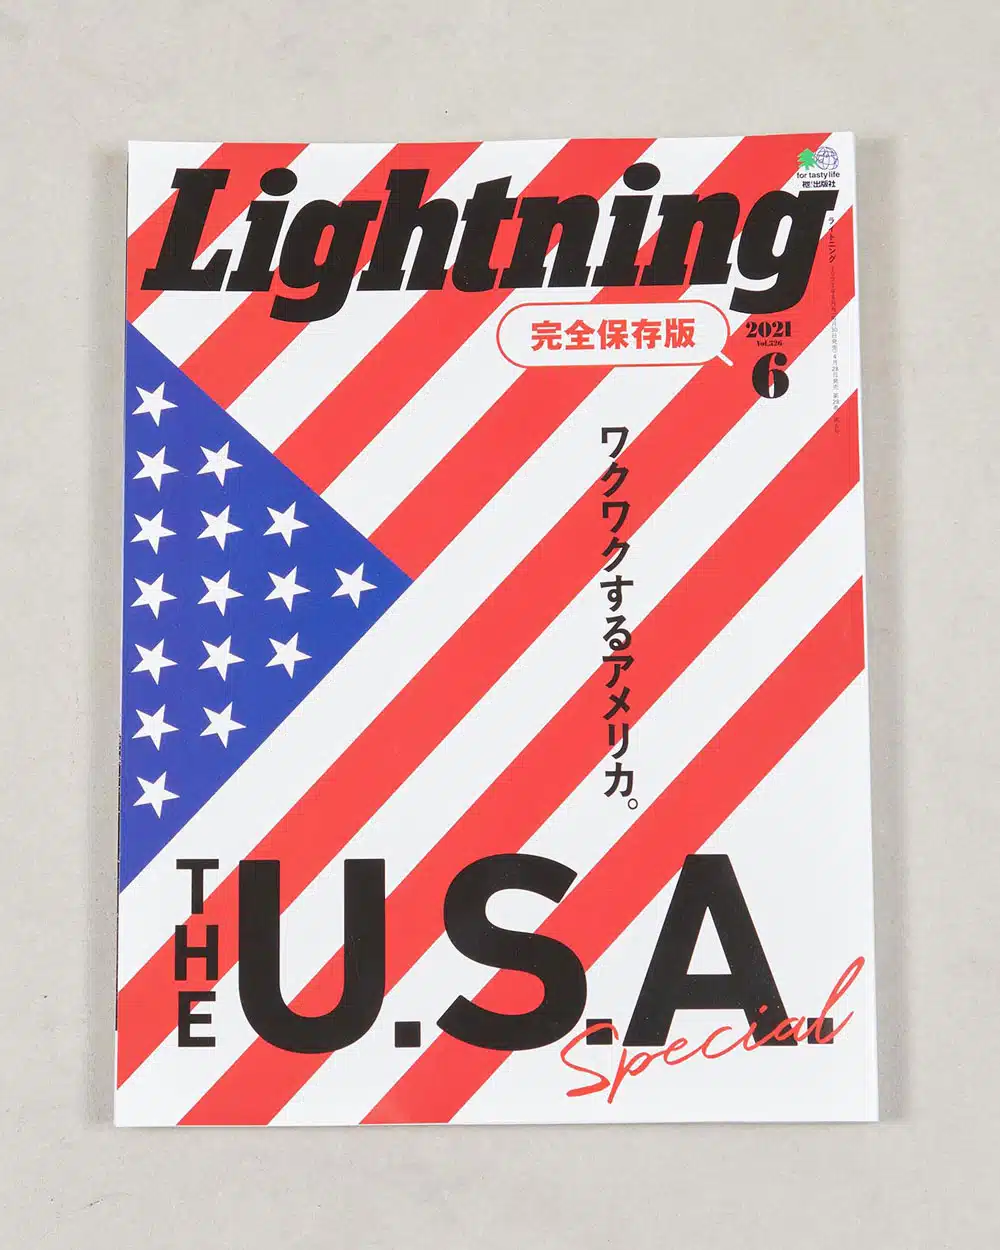 Lightning Archives Vol. 326 "The USA Special"